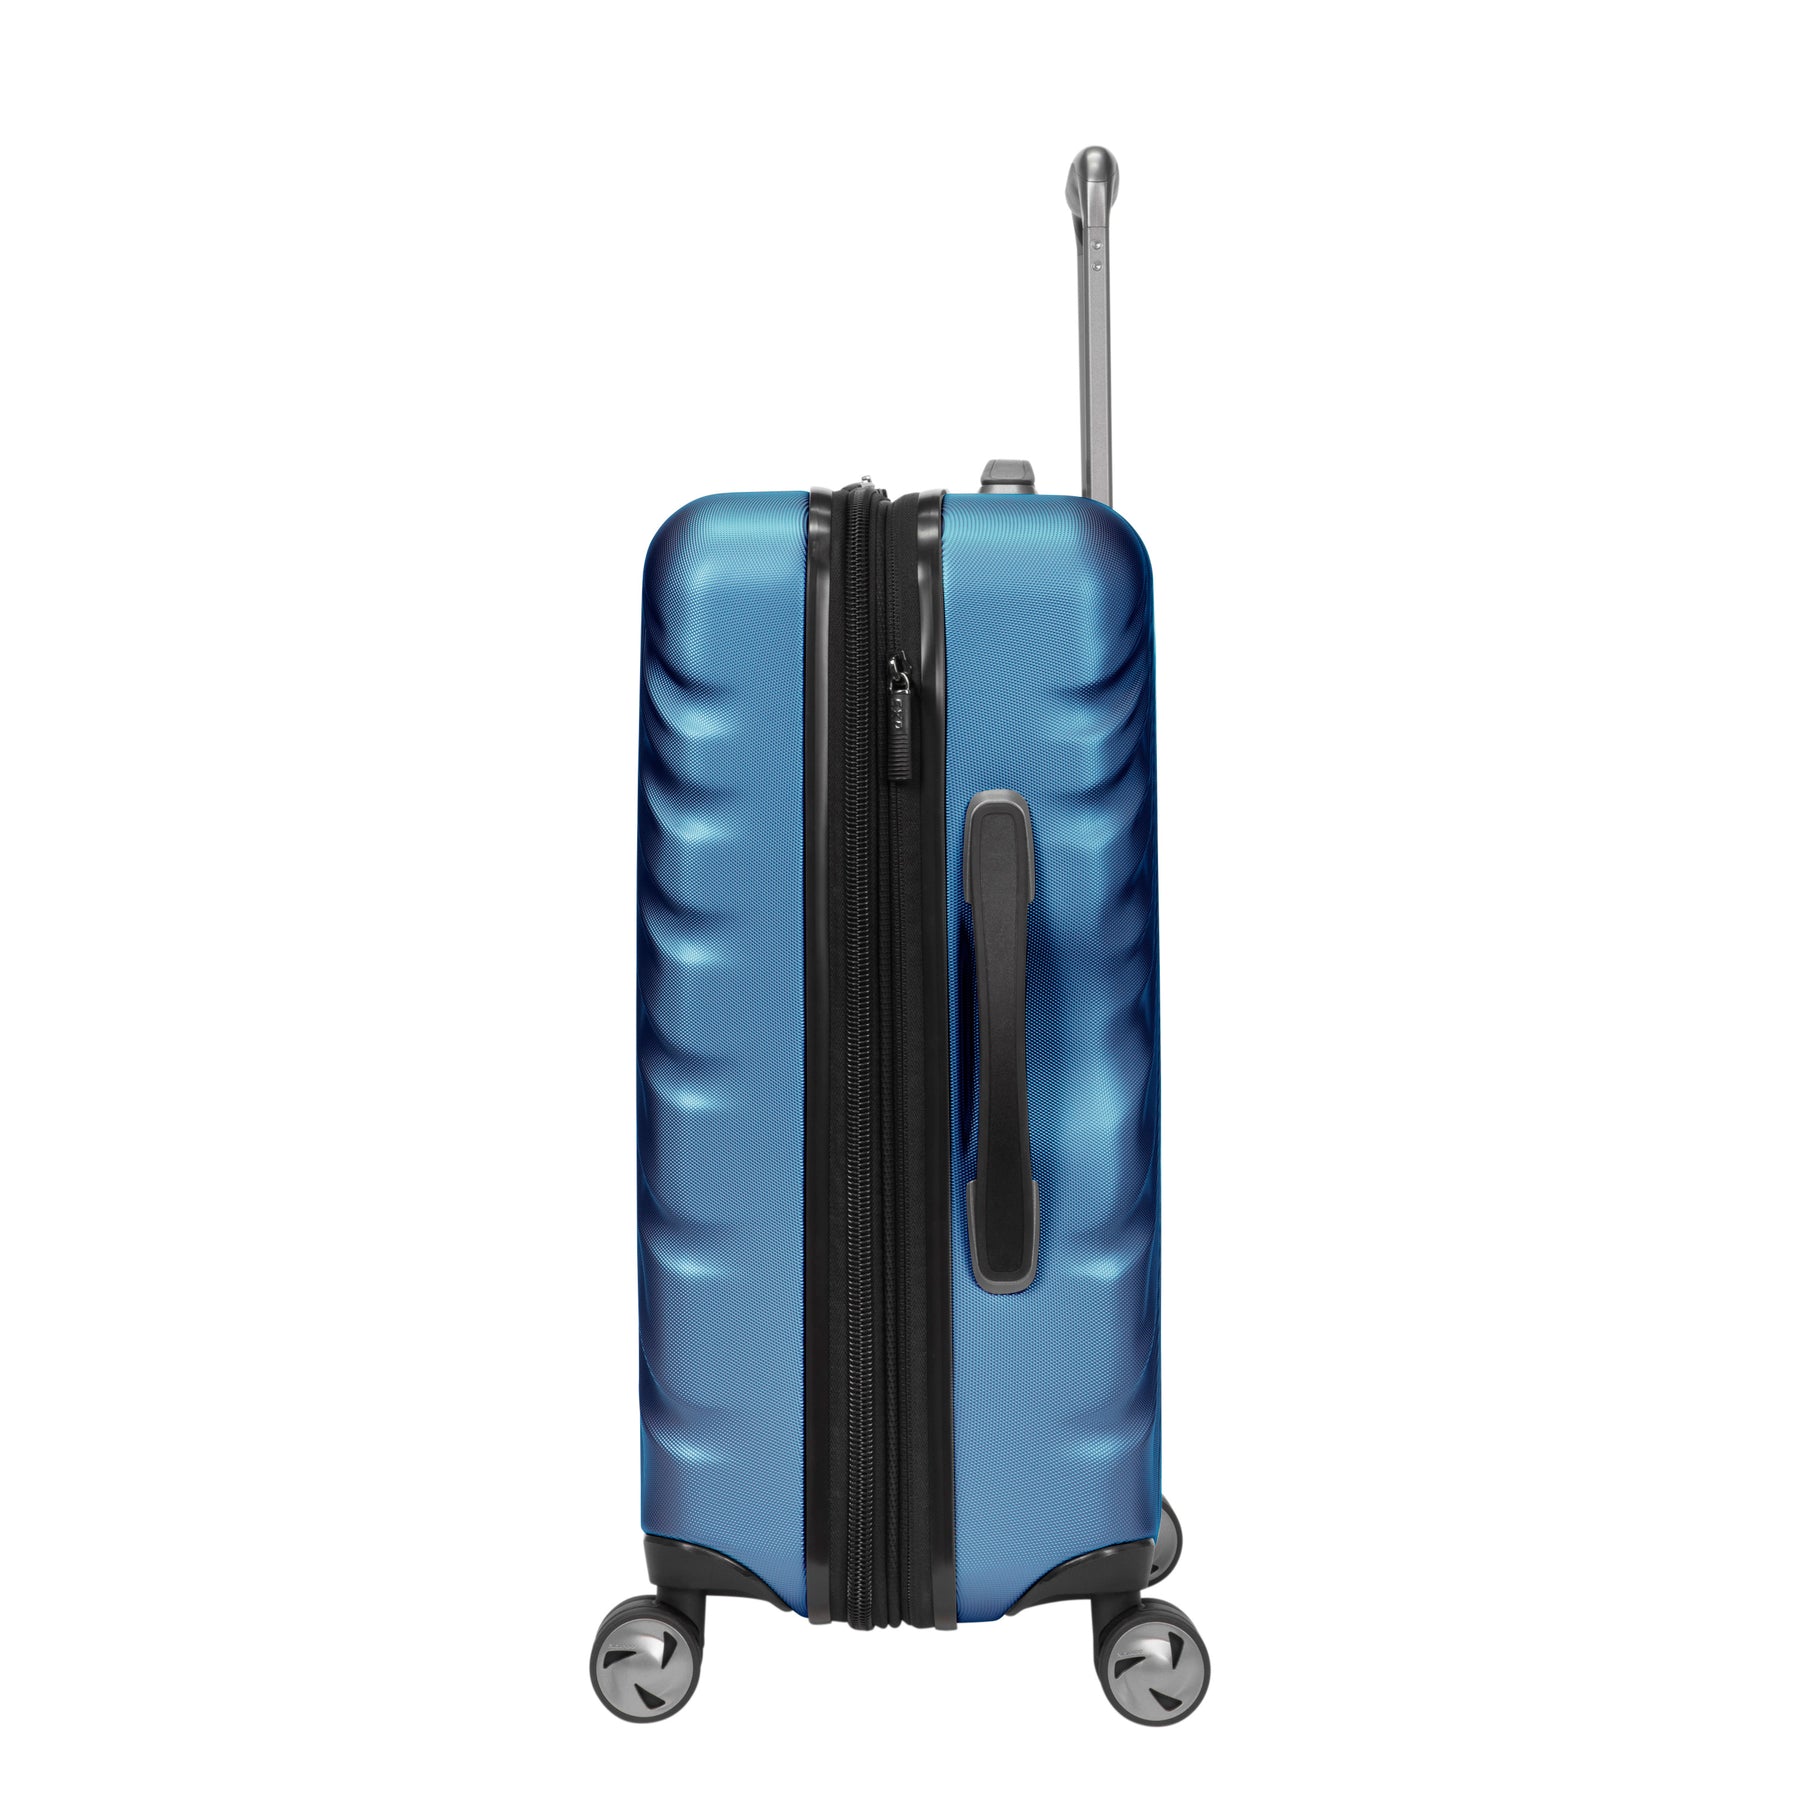 Mojave Hardside Carry-On Expandable Spinner